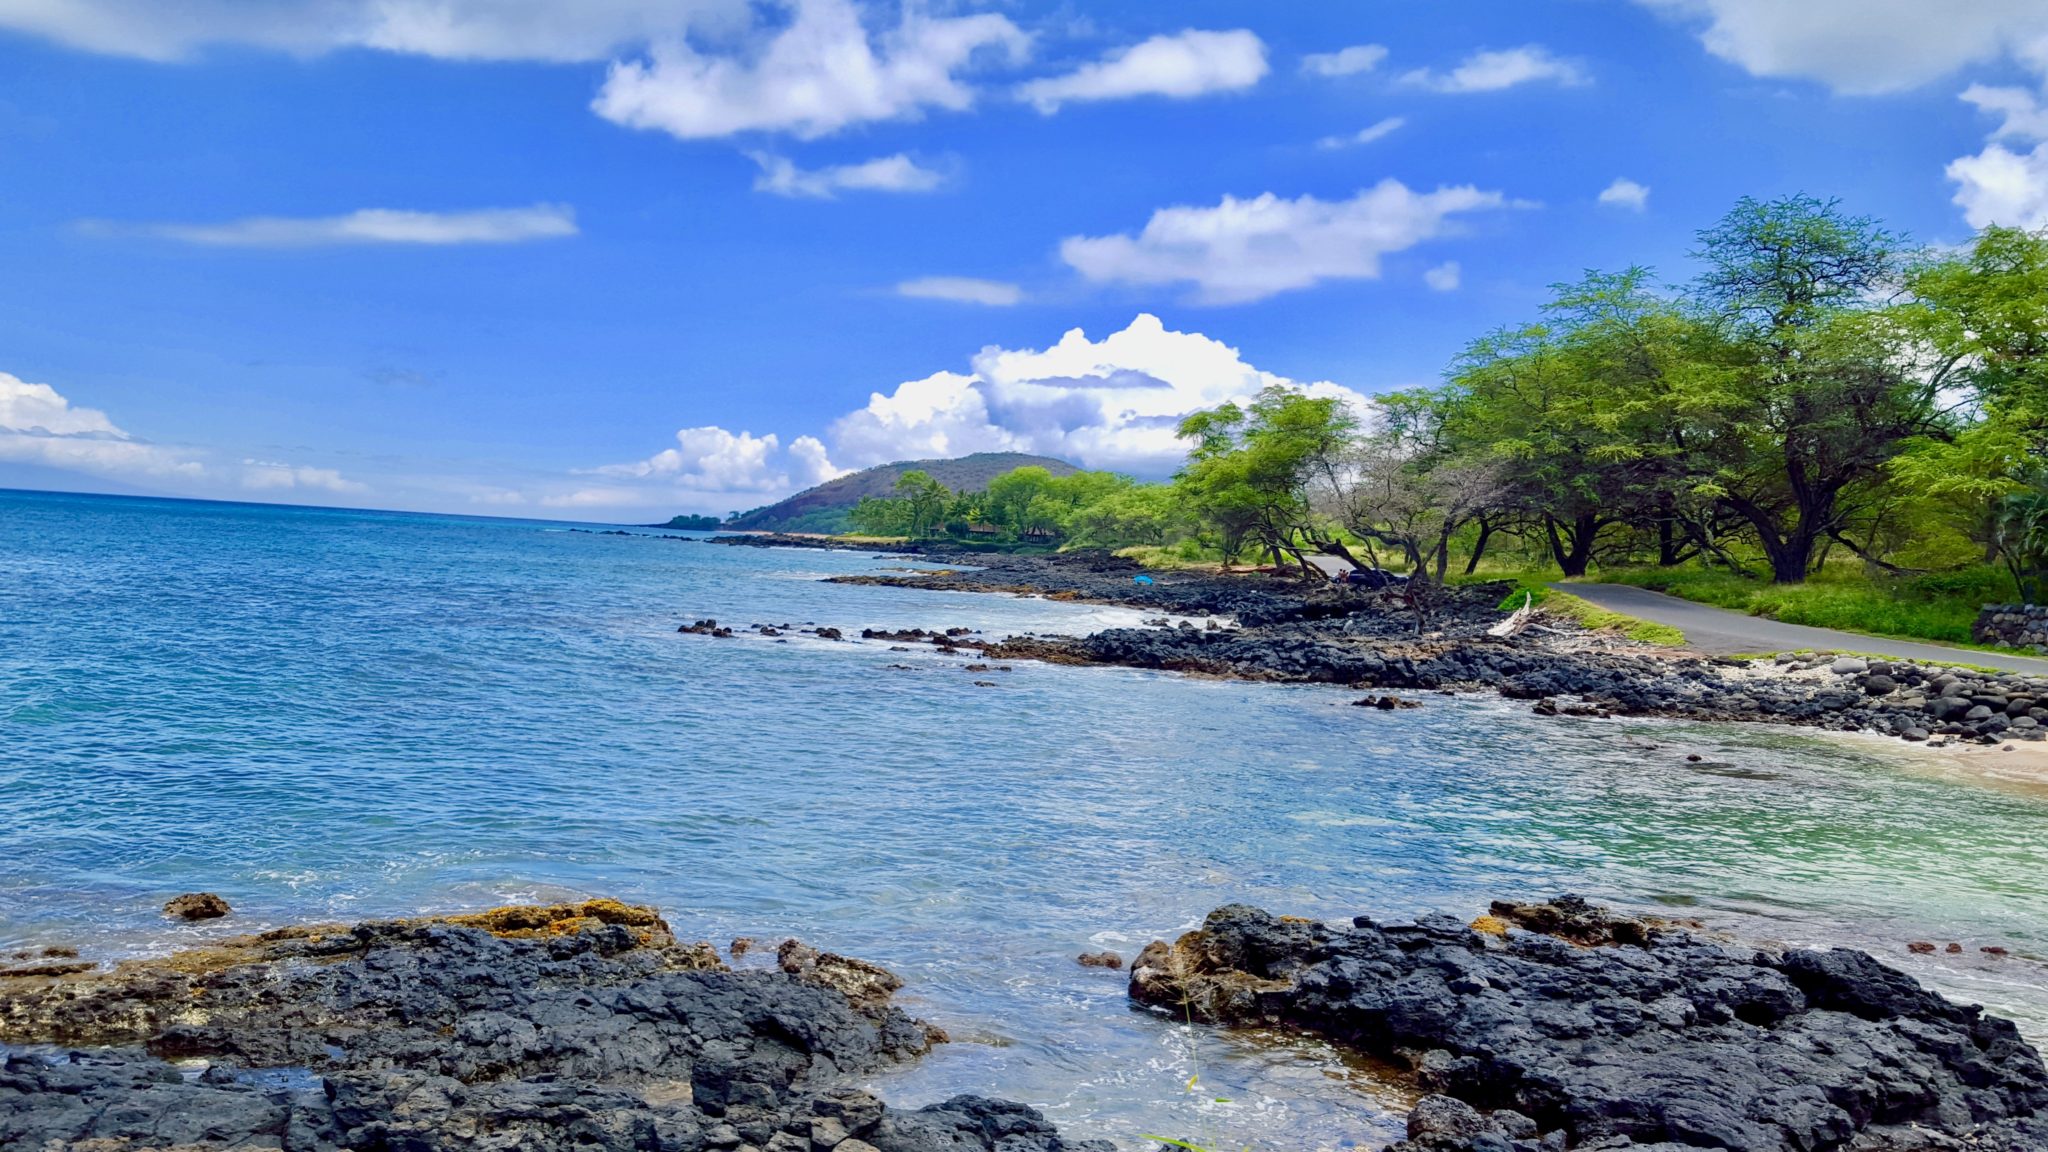 10 things to do in maui